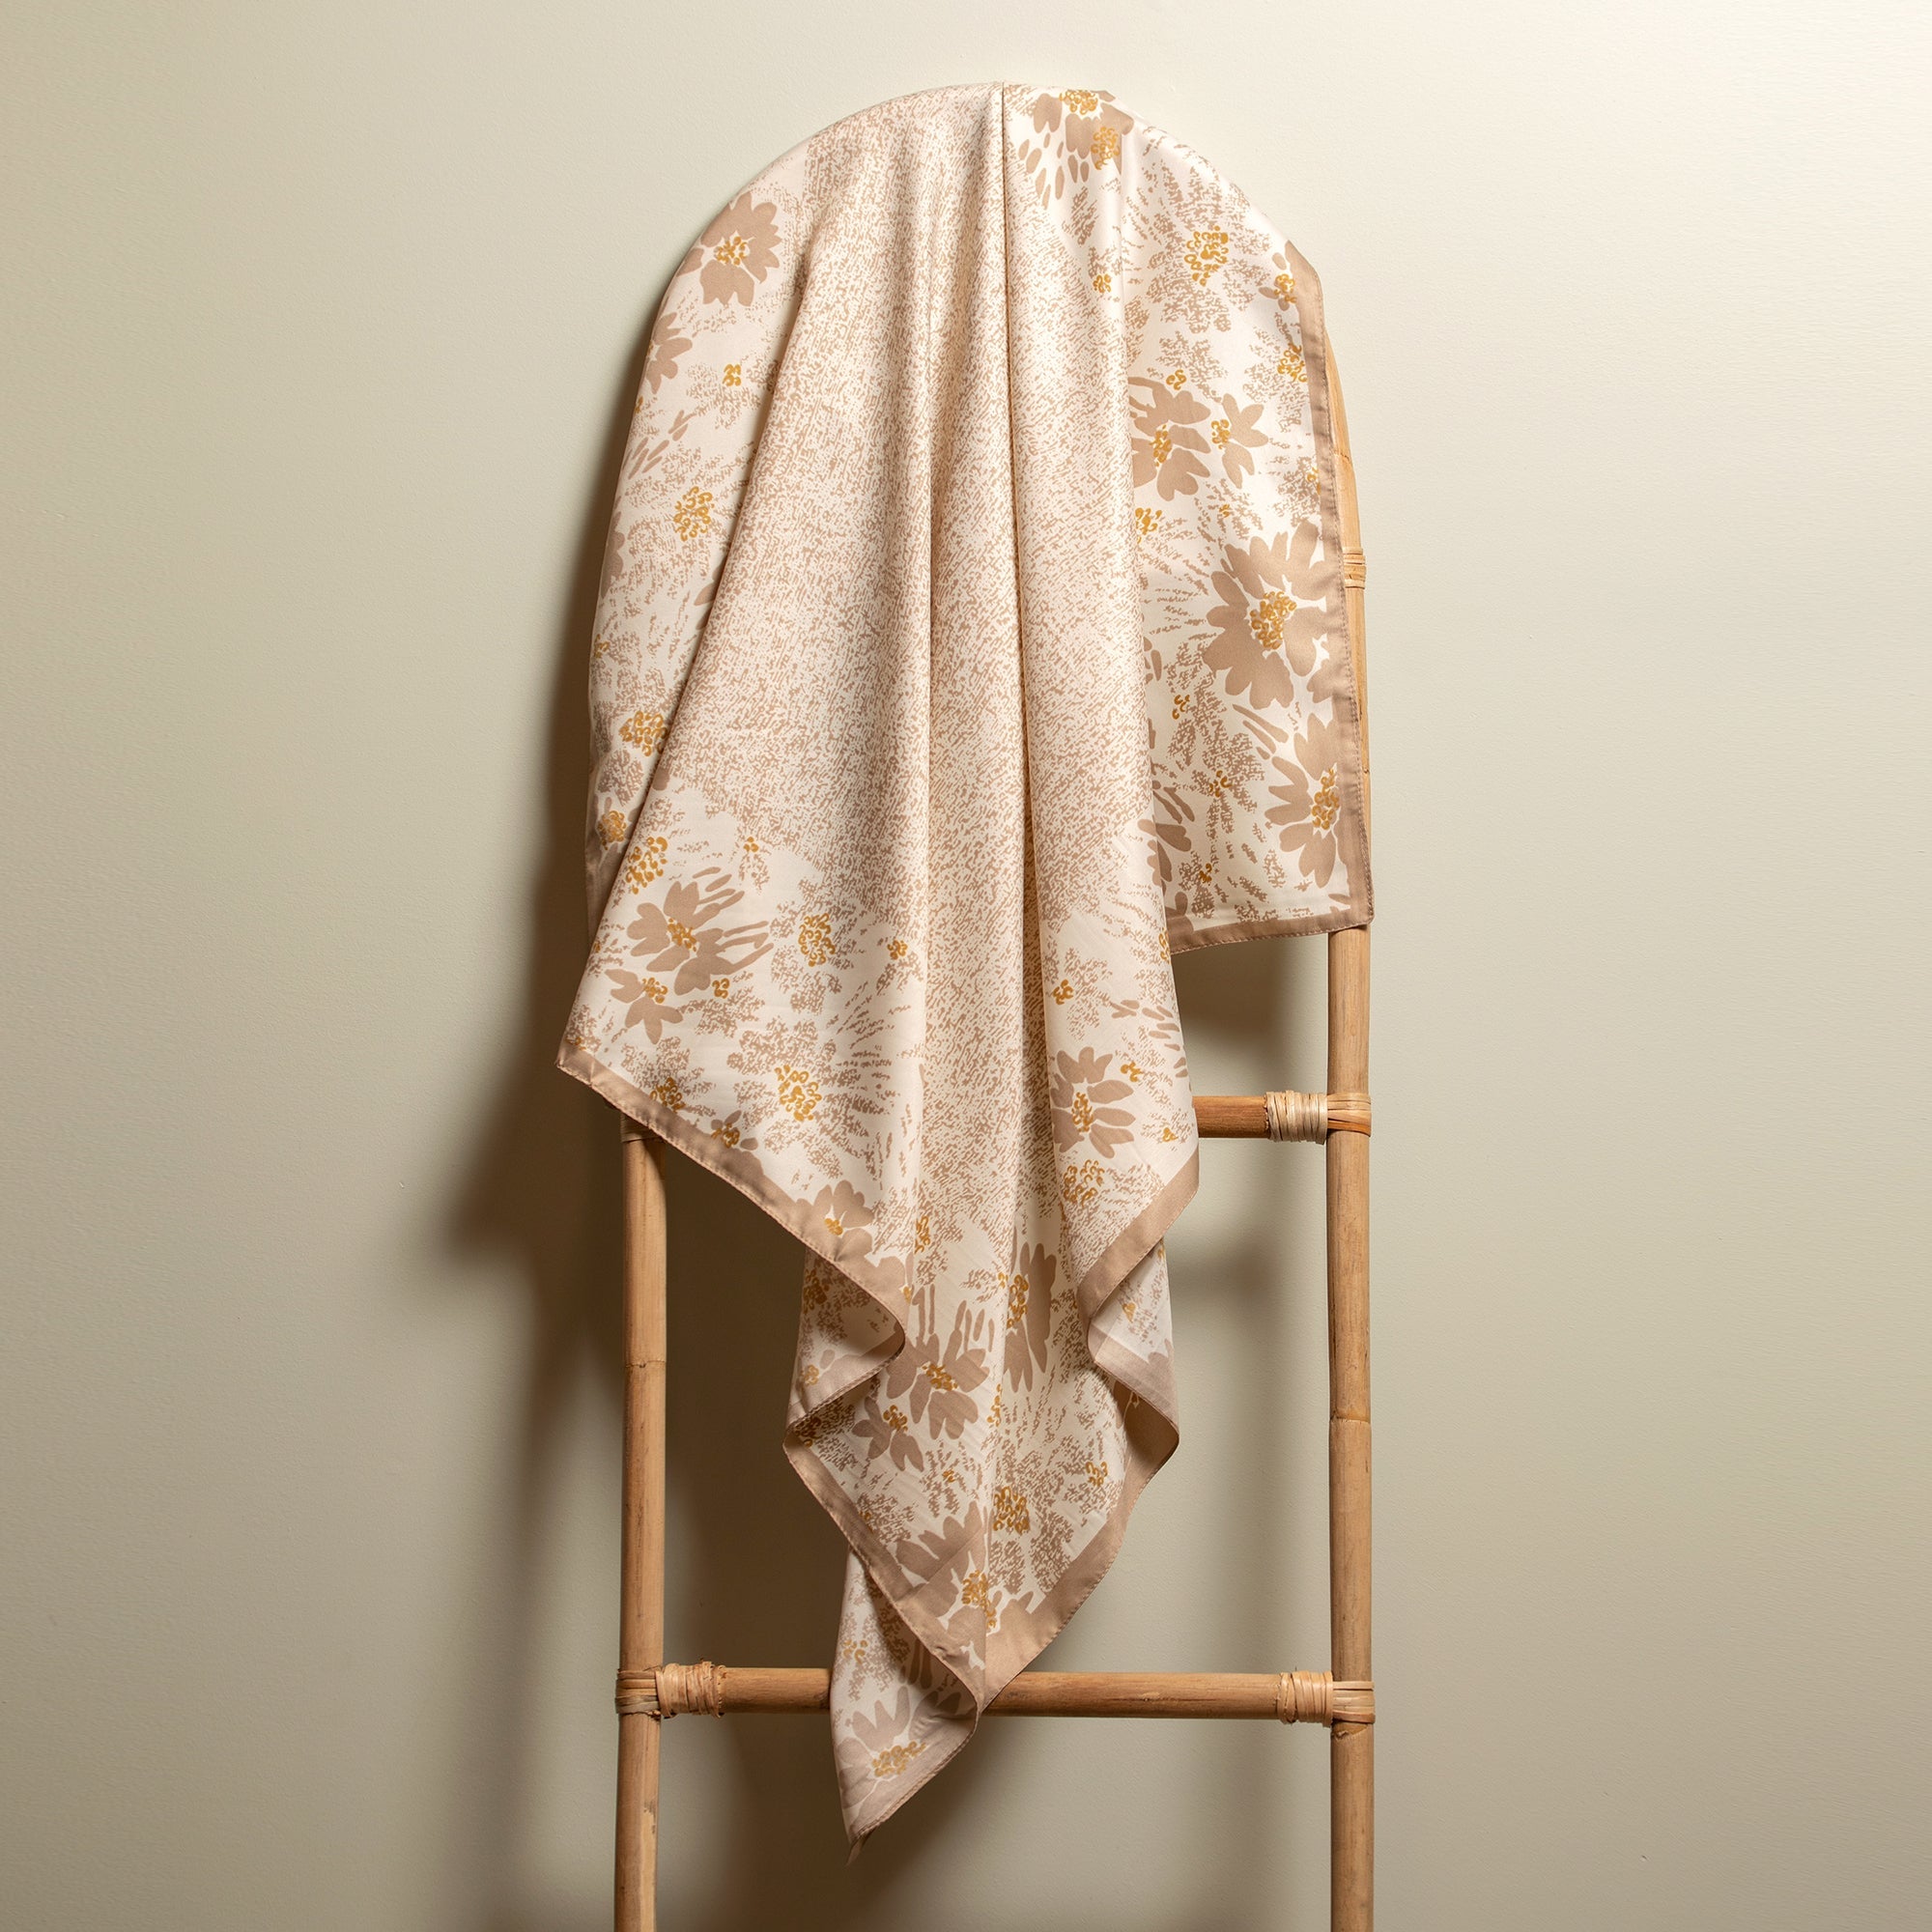 Floral Speckled Print Silky Scarf